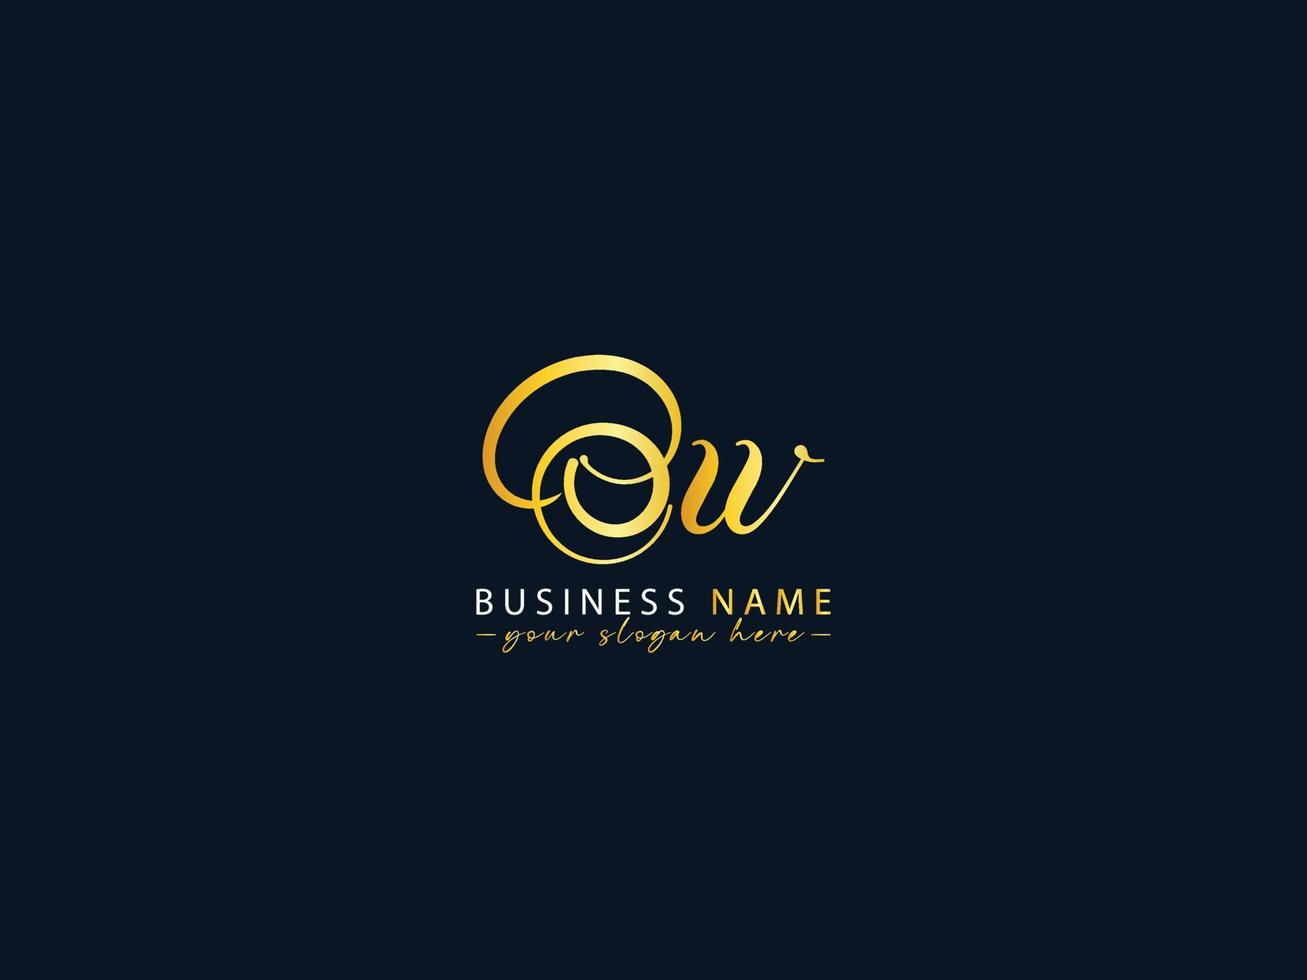 Initials Ow Logo Image, Luxury Ow Letter Logo Vector